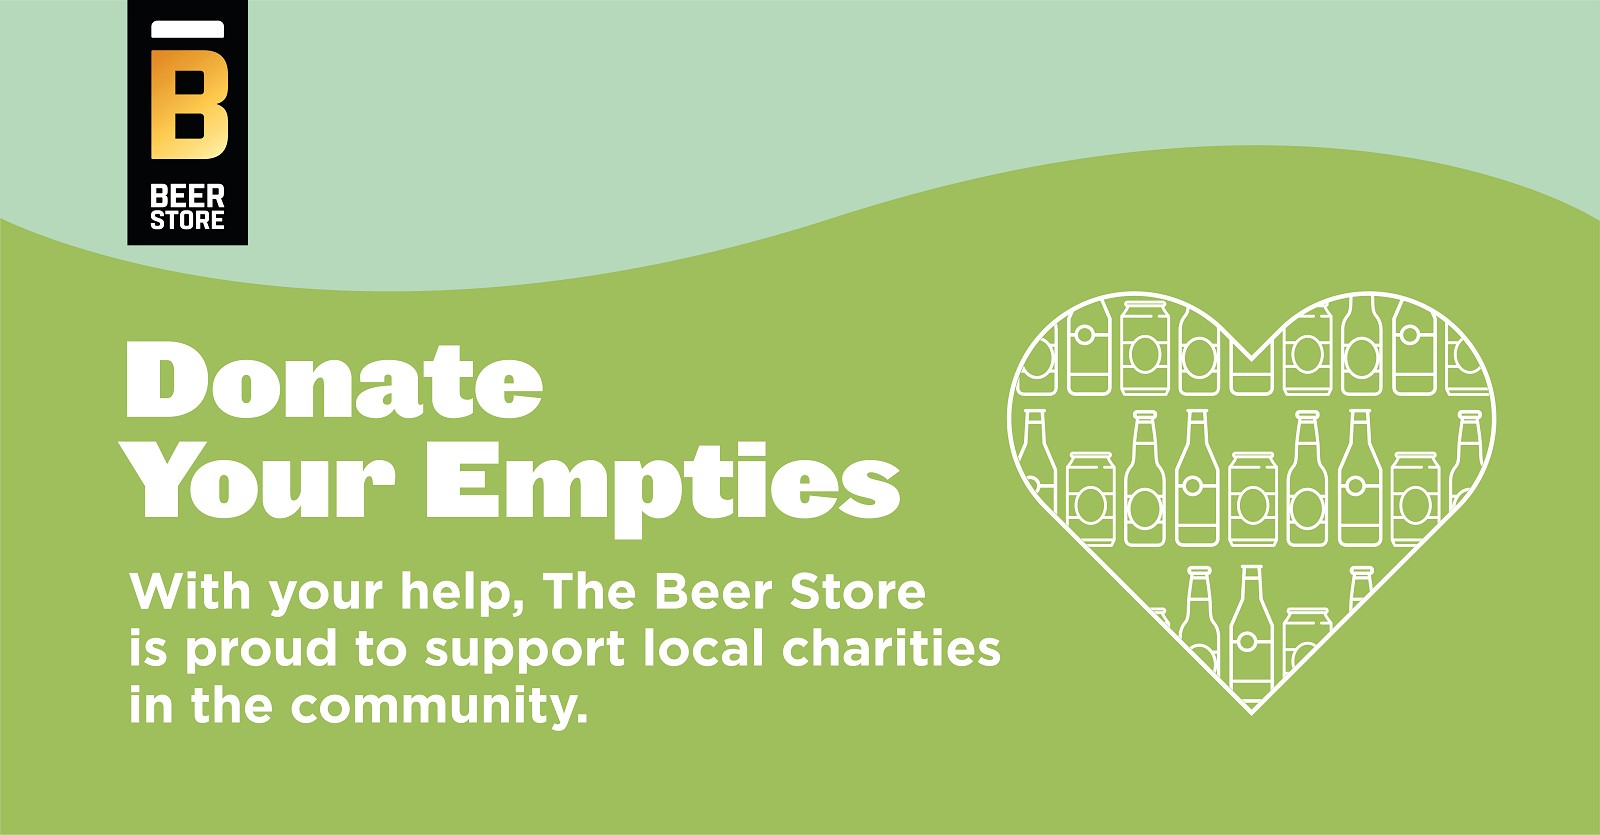 Aug 13 - Donate Your Empties